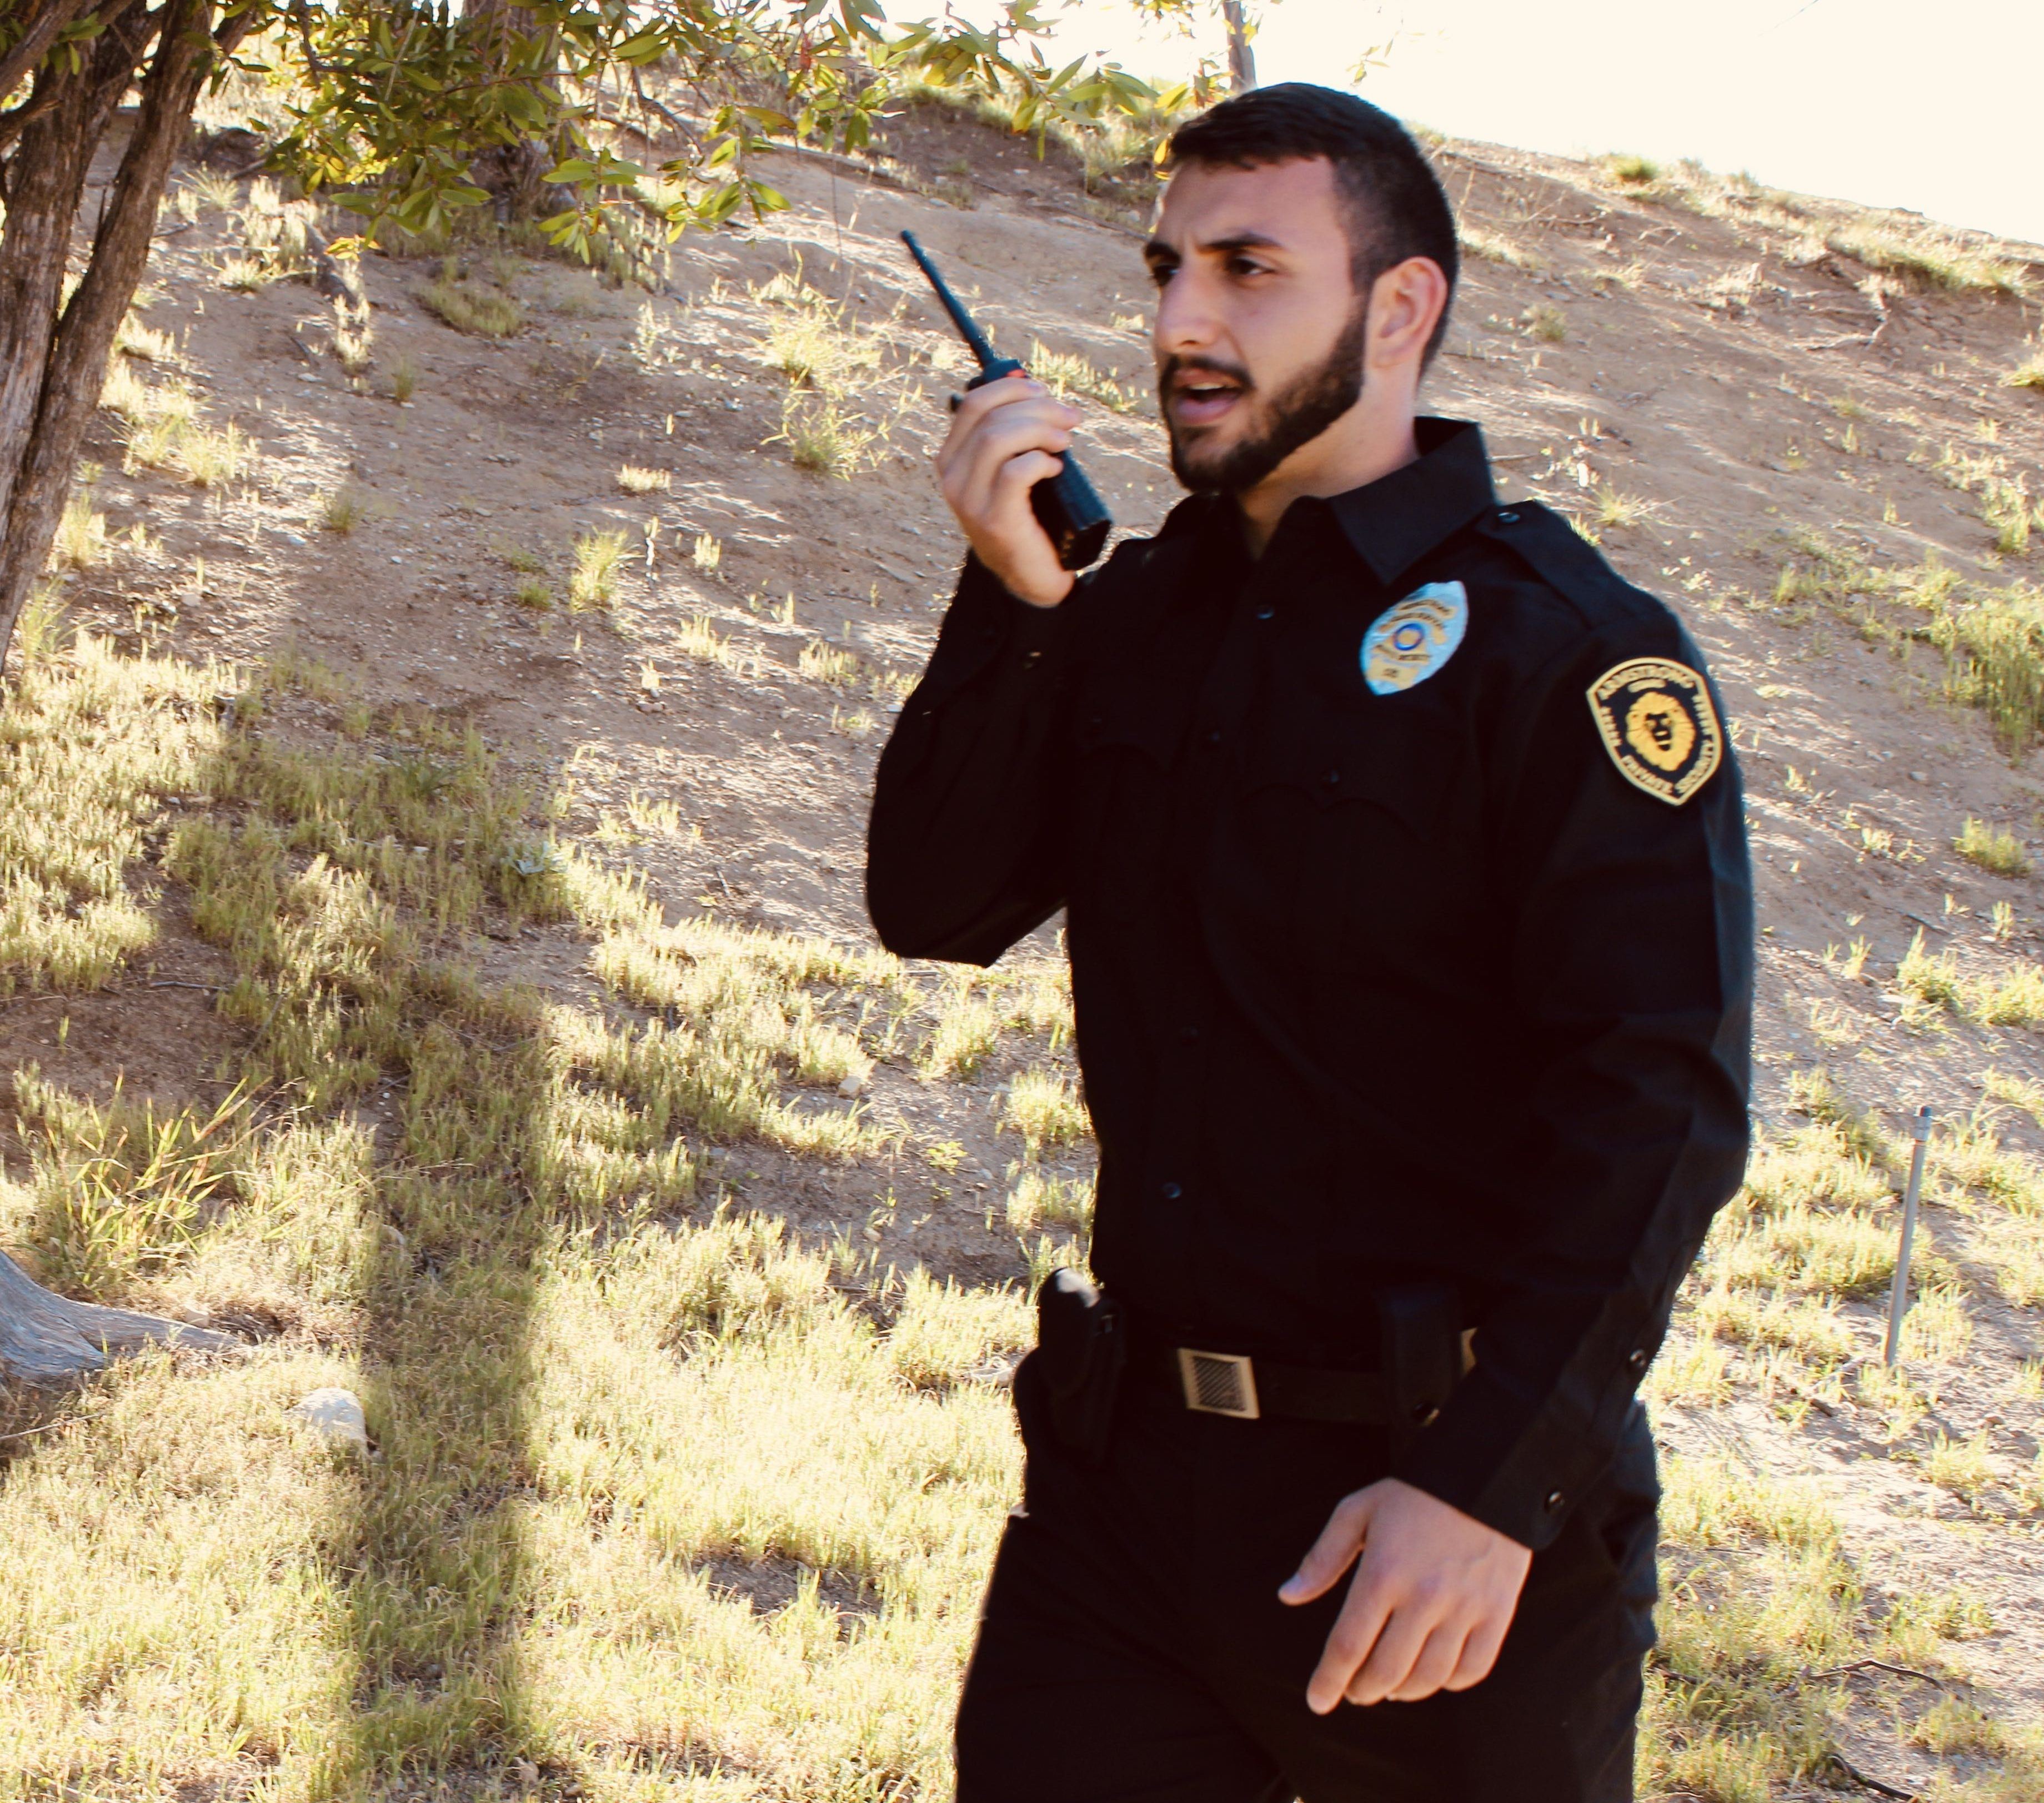 Image of the security guard on phone, Armstrong Security Guard Company Los Angeles